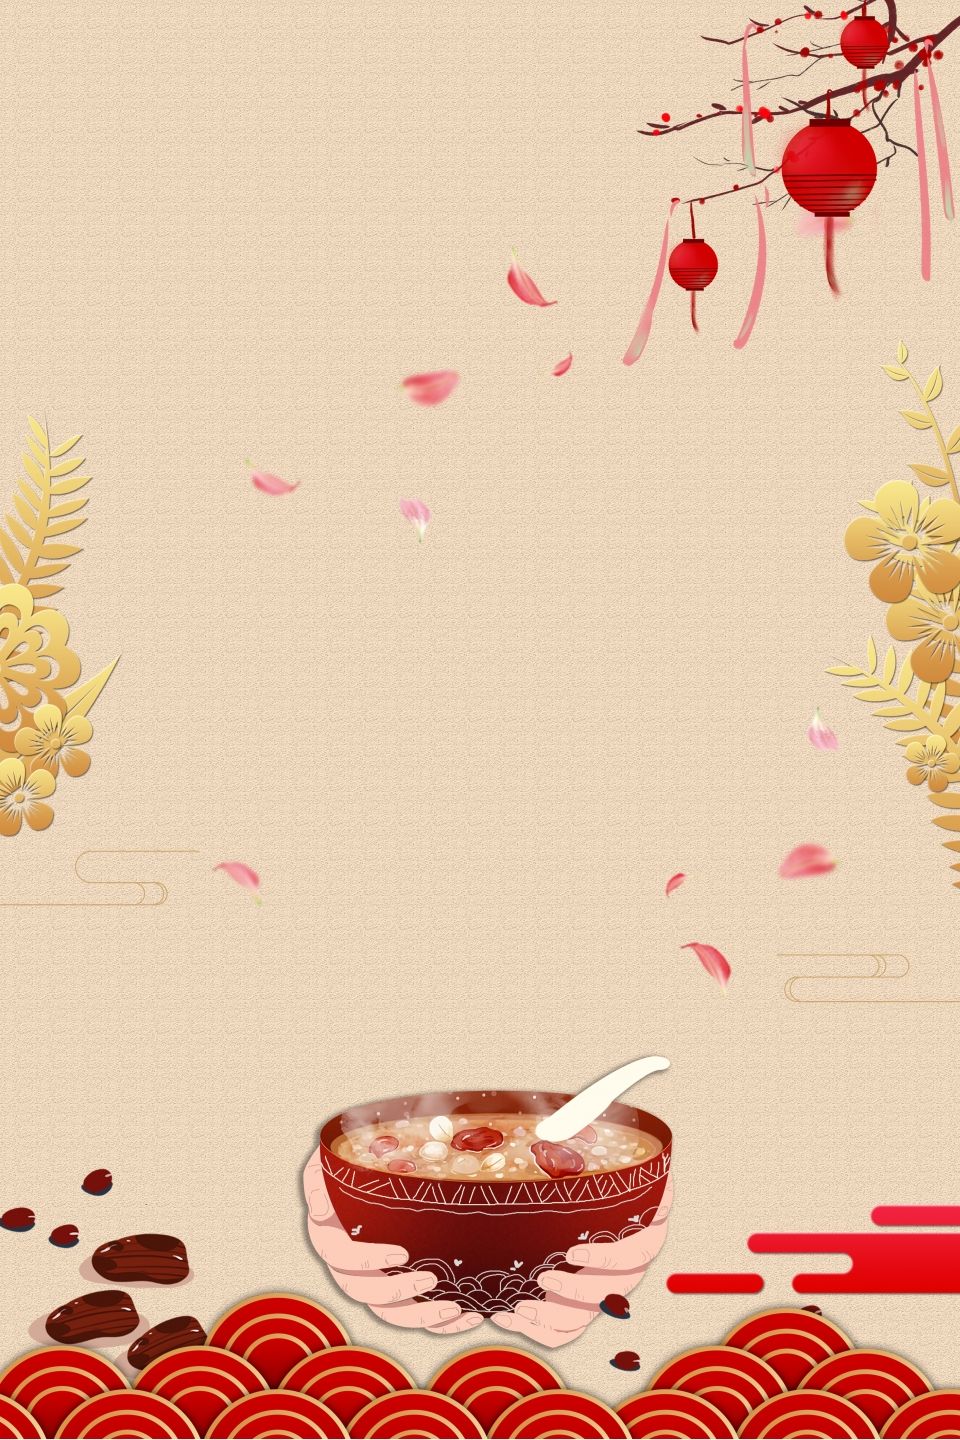 Chinese New Year Celebration Laba Festival Poster Design, New Year, Festive Background Image for Free Download